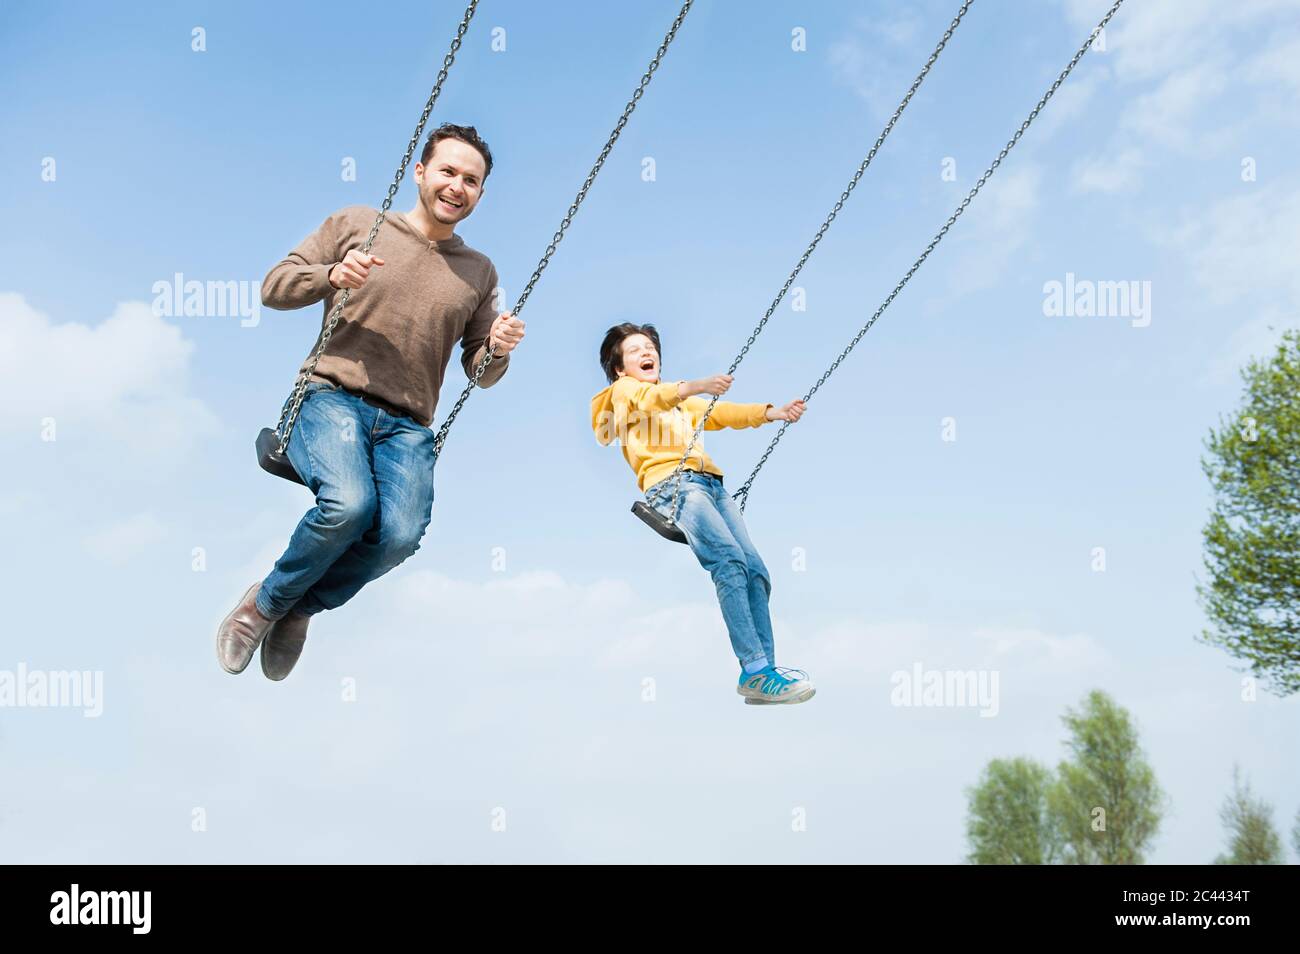 Cheerful father and son swinging against blue sky Stock Photo